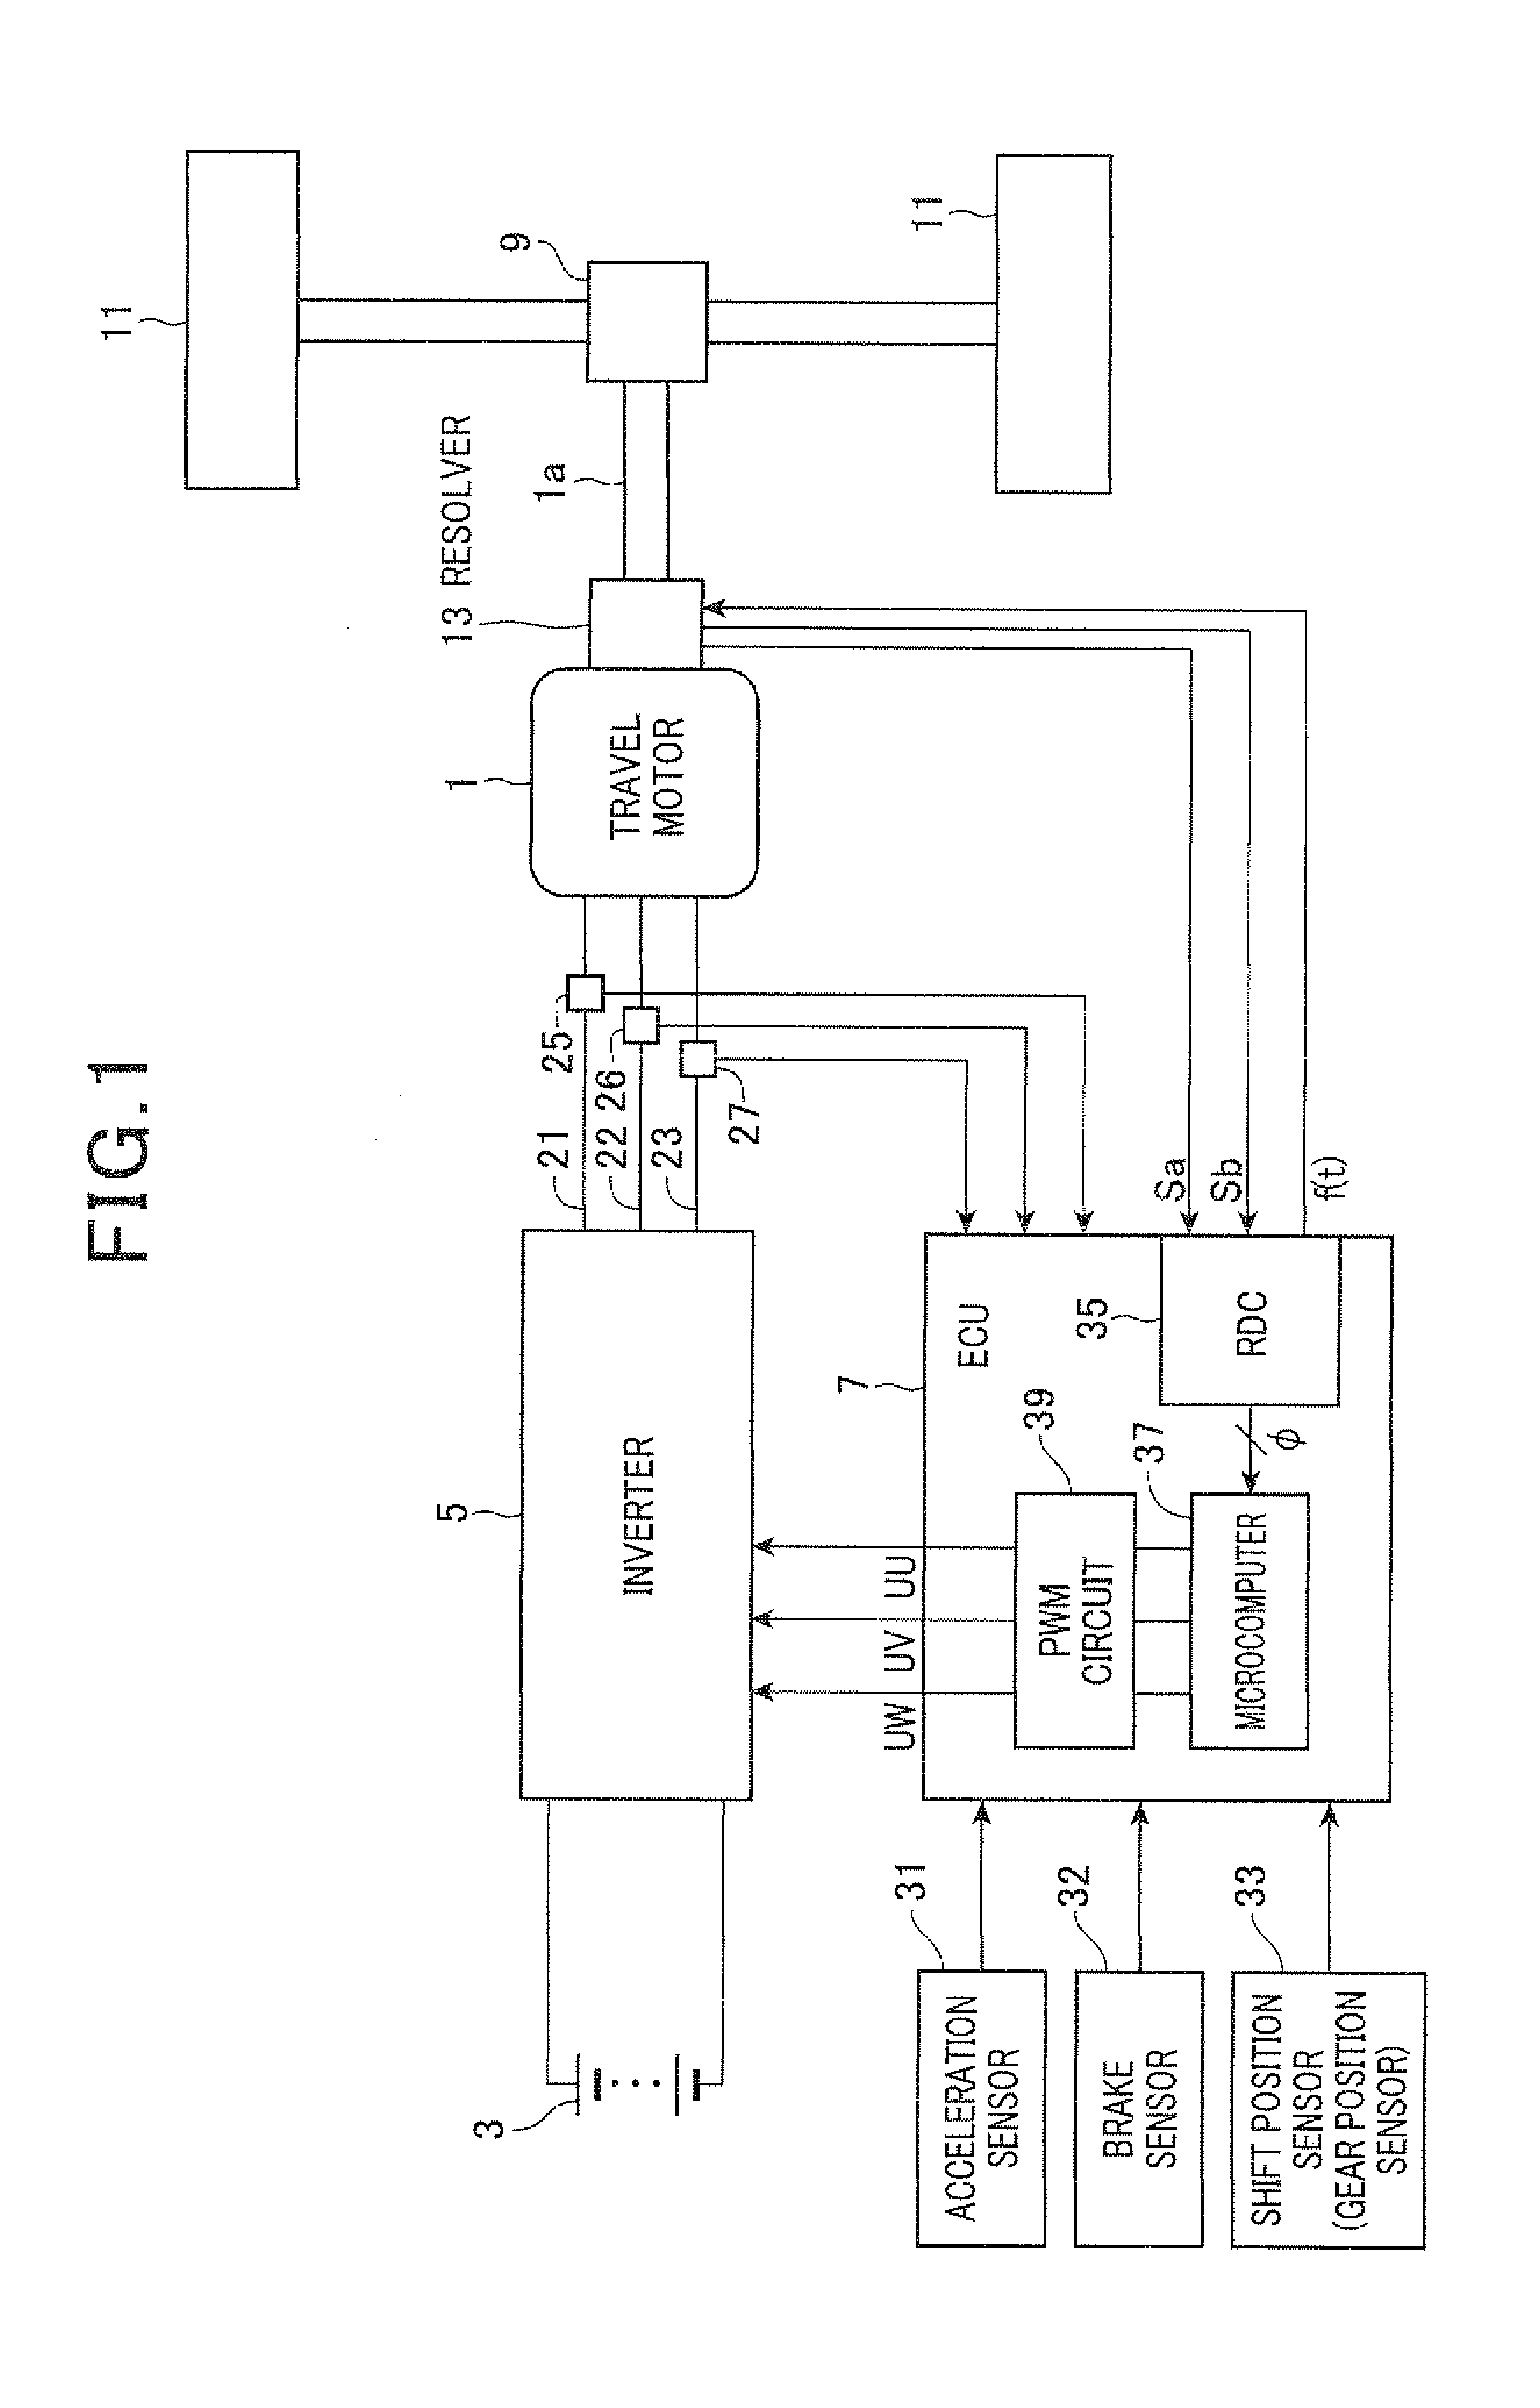 Control device for controlling travel motor of vehicle